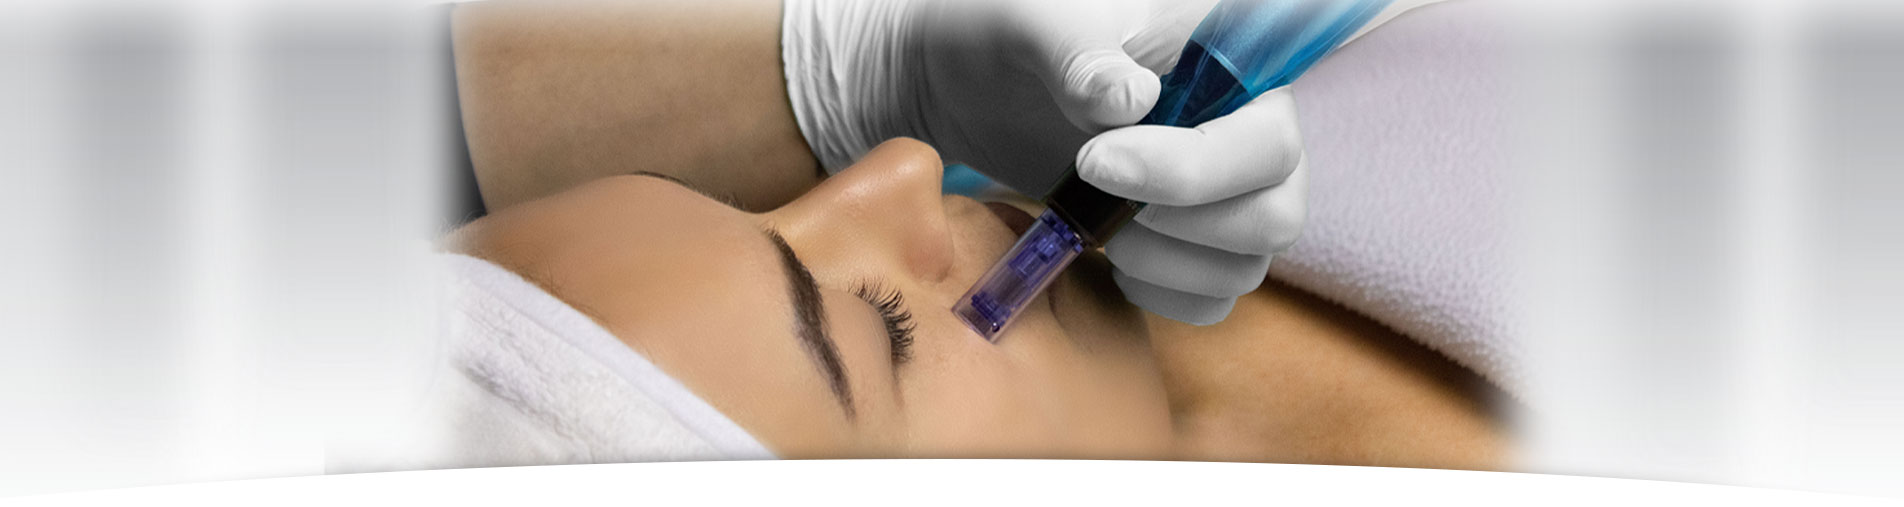 Microneedling mesotherapy